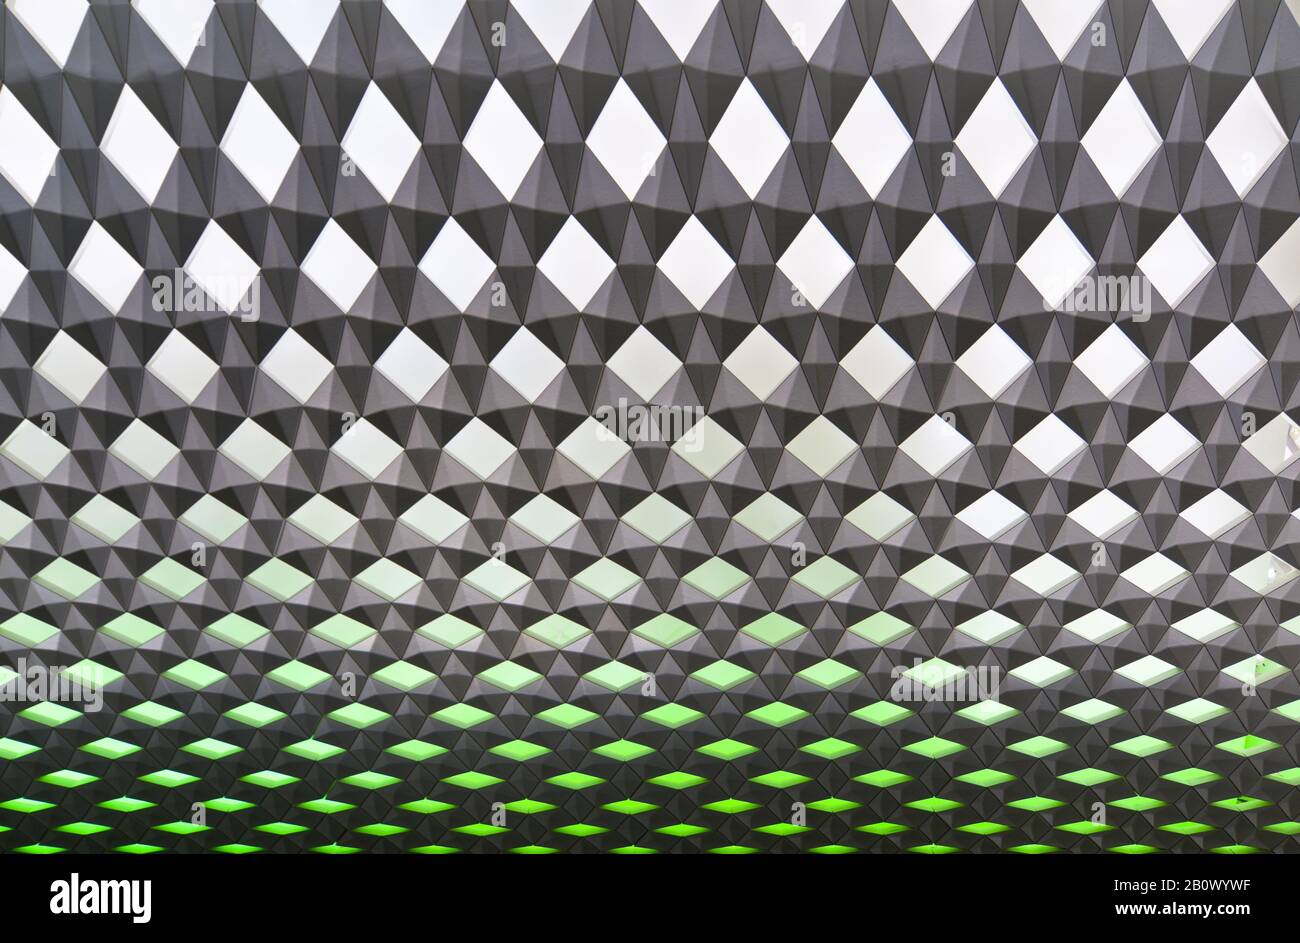 Architecture, detail, honeycomb structure, Stock Photo